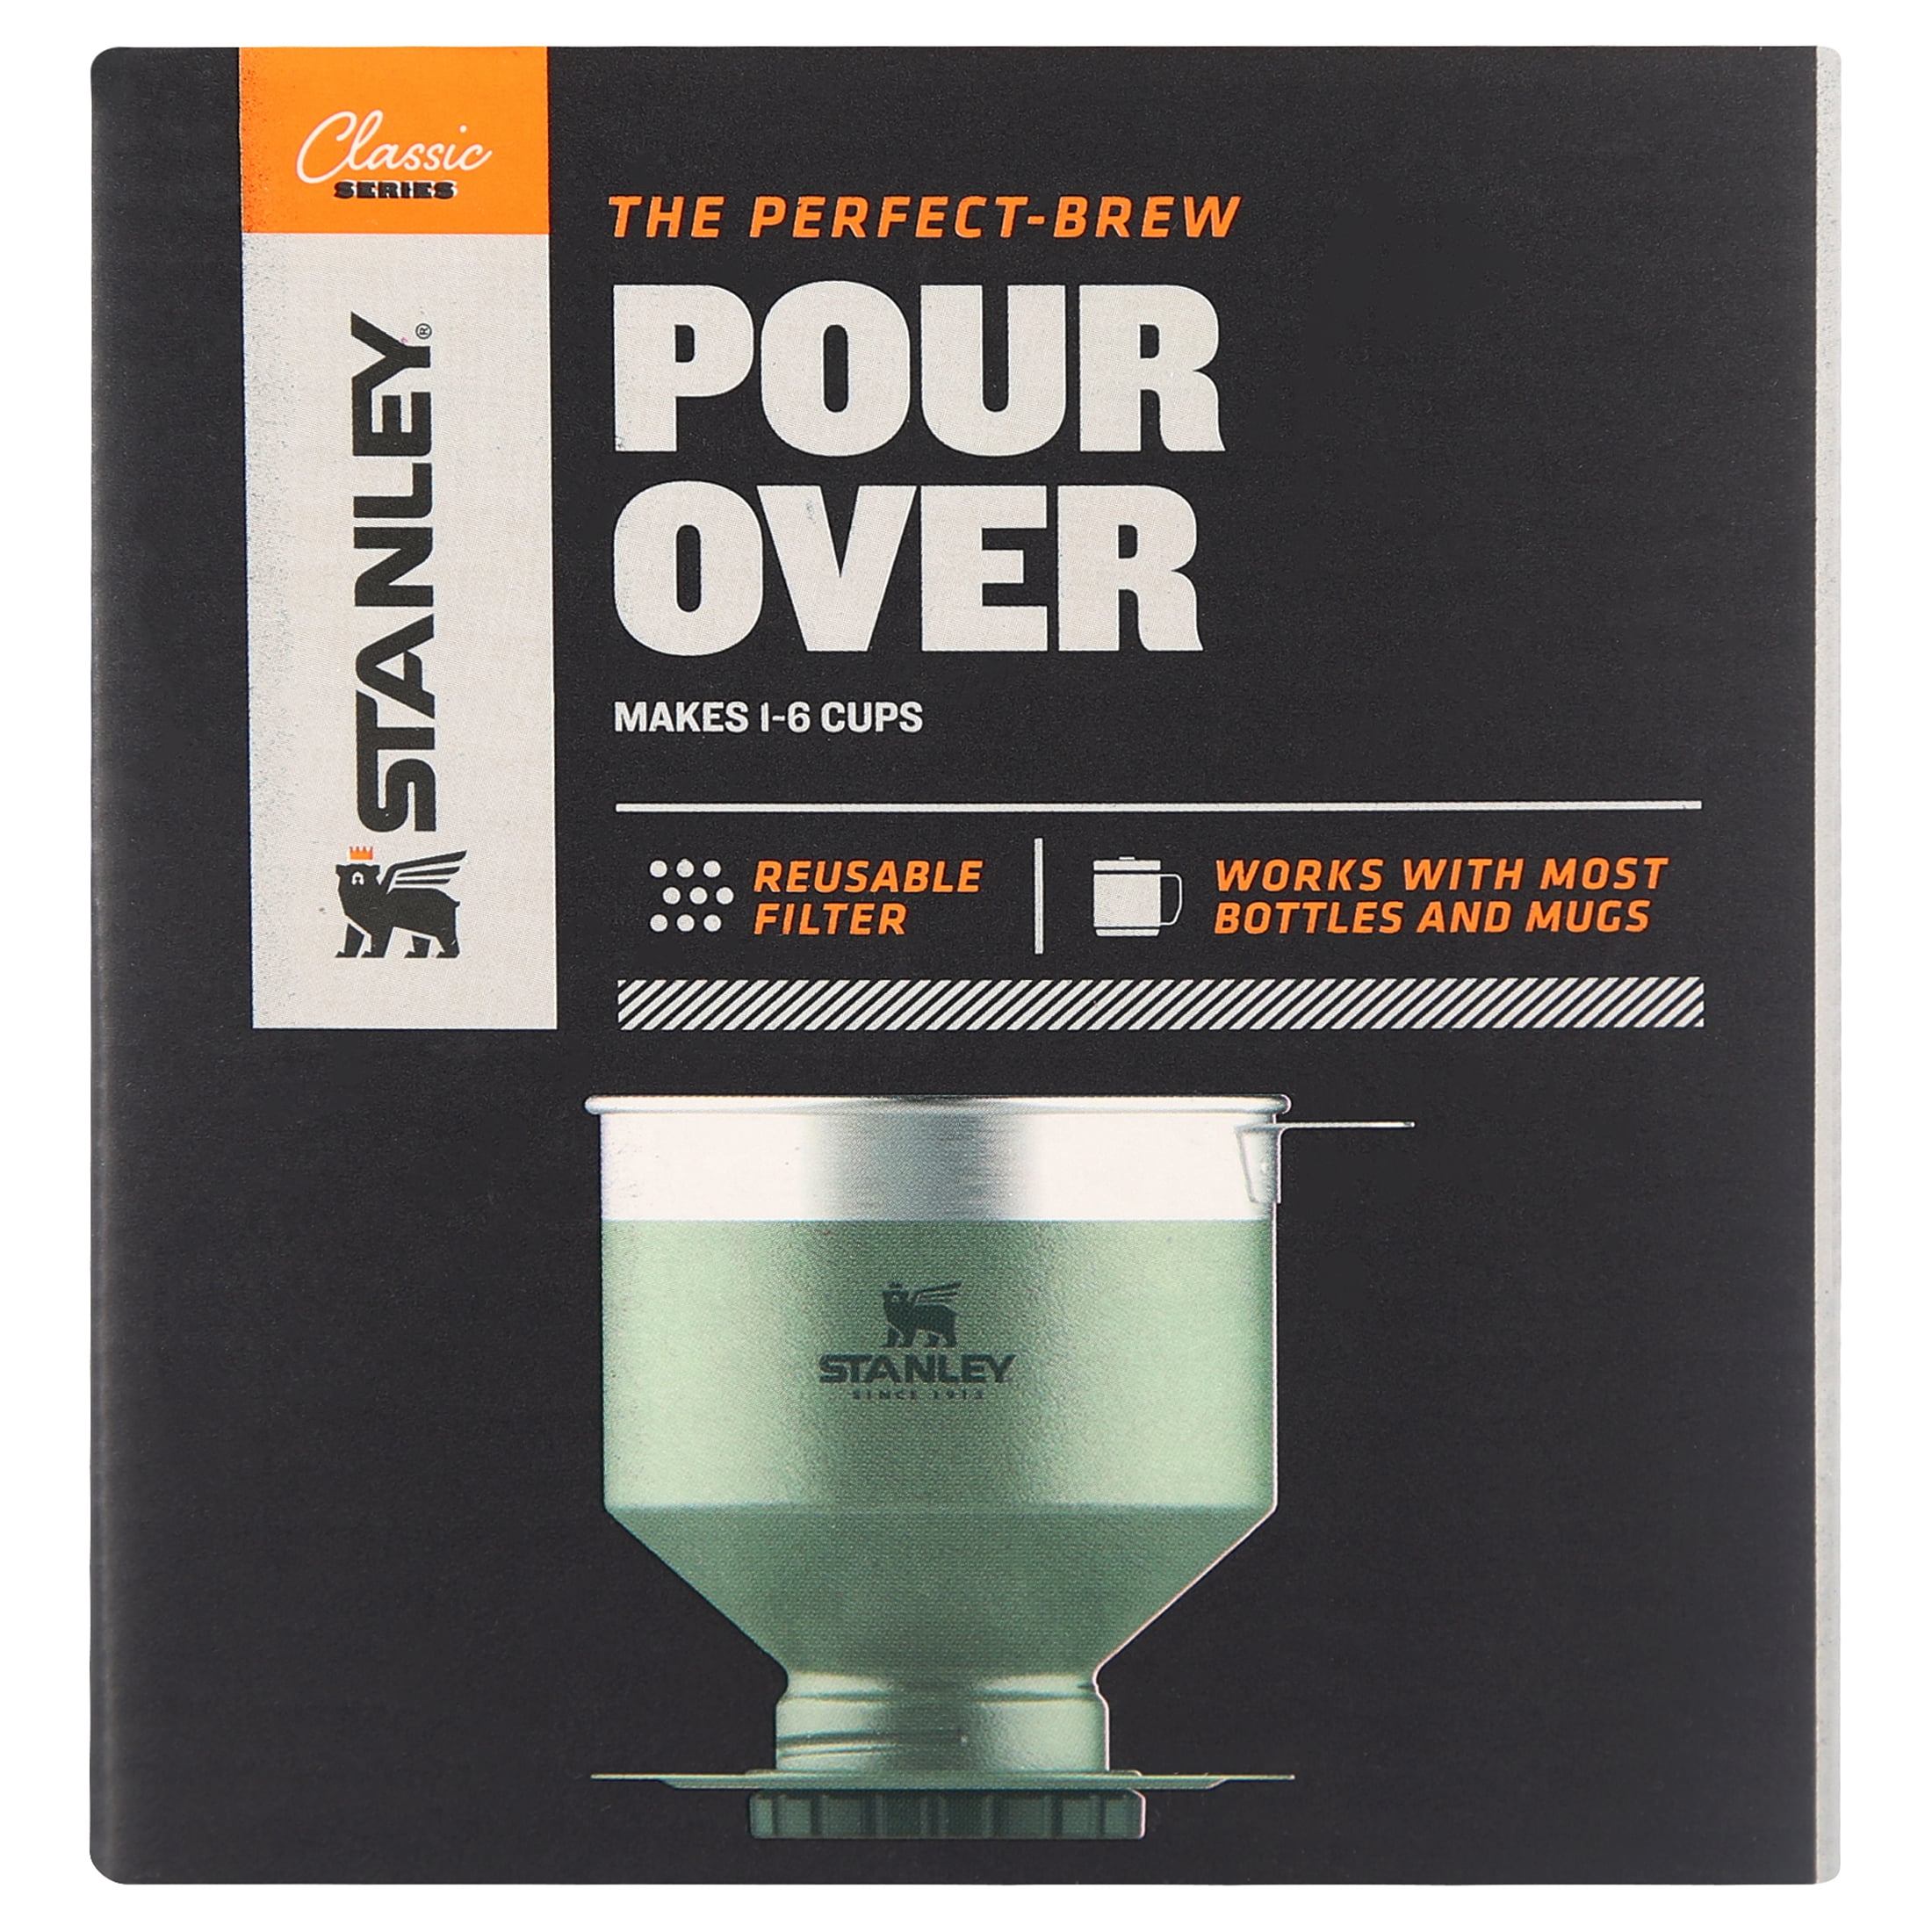  Stanley Perfect Brew Pour Over - Makes 1-6 Cups - Reusable  Filter - No Disposable Paper Filters Needed - Compatible with Stanley  Bottles - BPA-Free - Easy-clean Stainless Steel & Detachable